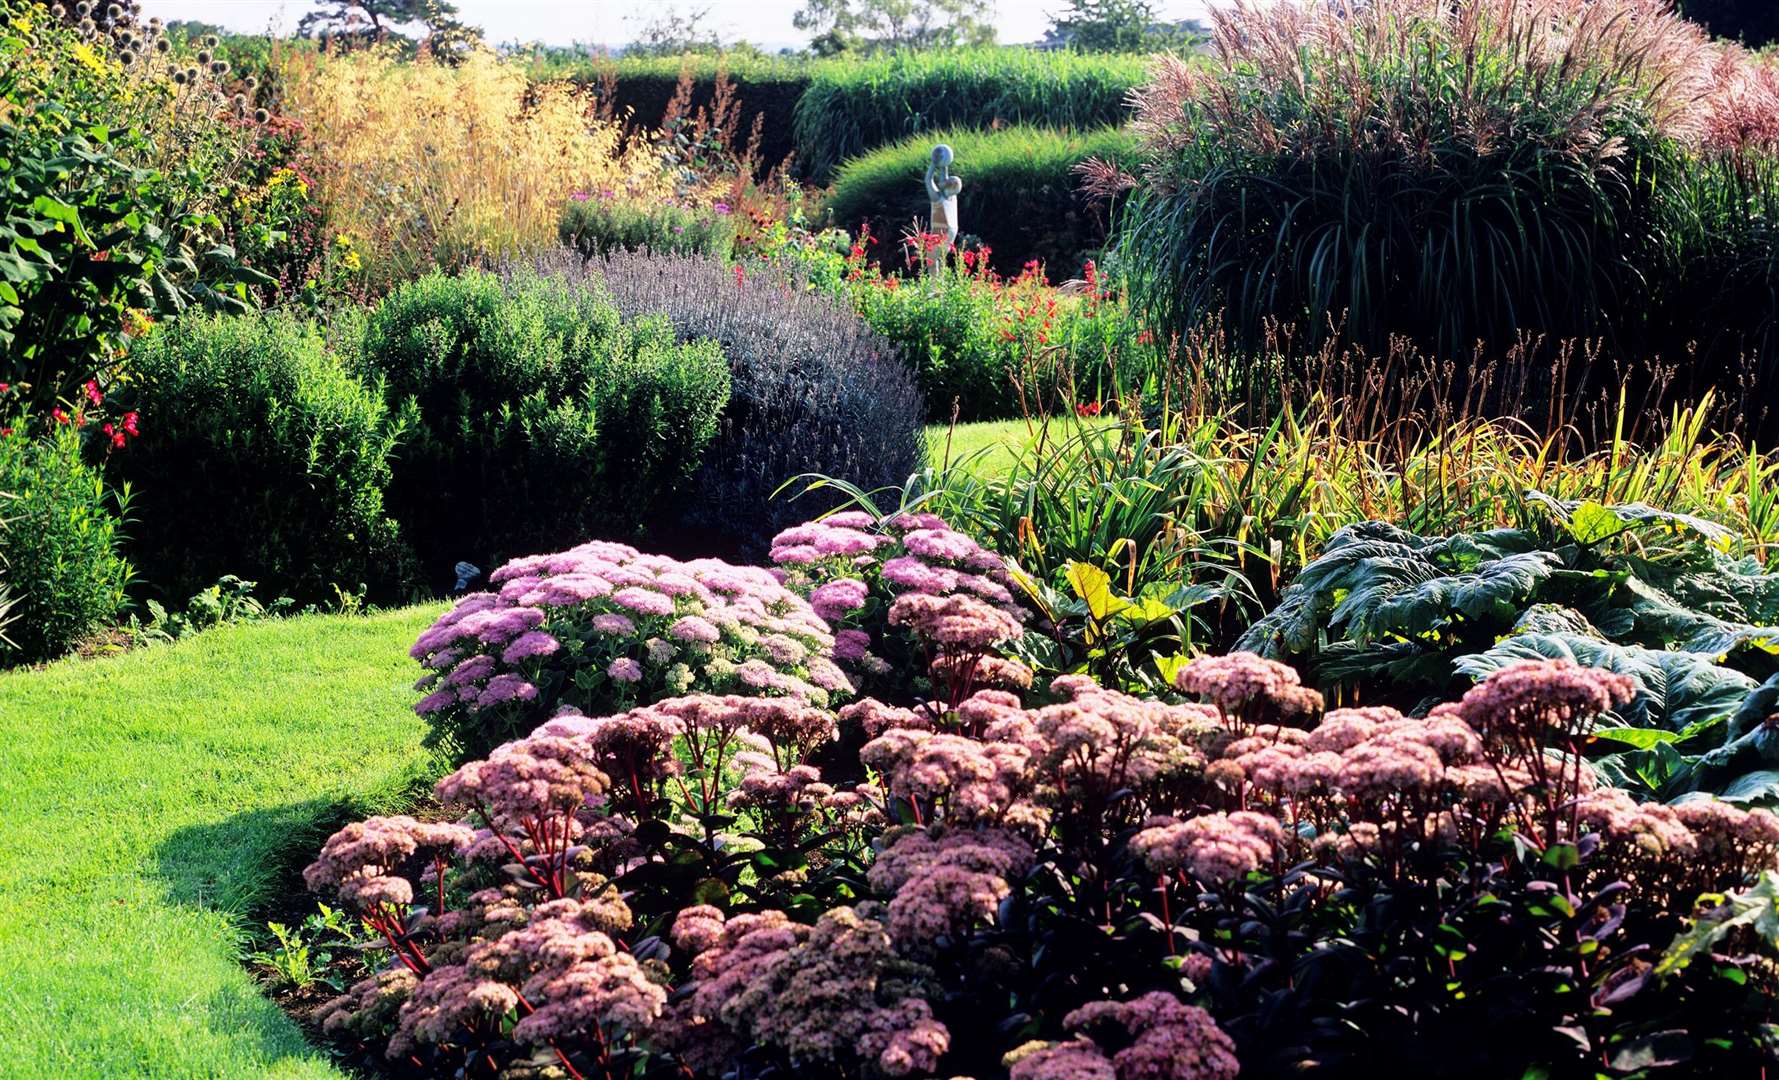 The 10-acre gardens at Nettlestead Place are filled with colourful and unique flowers. Picture: Leigh Clapp